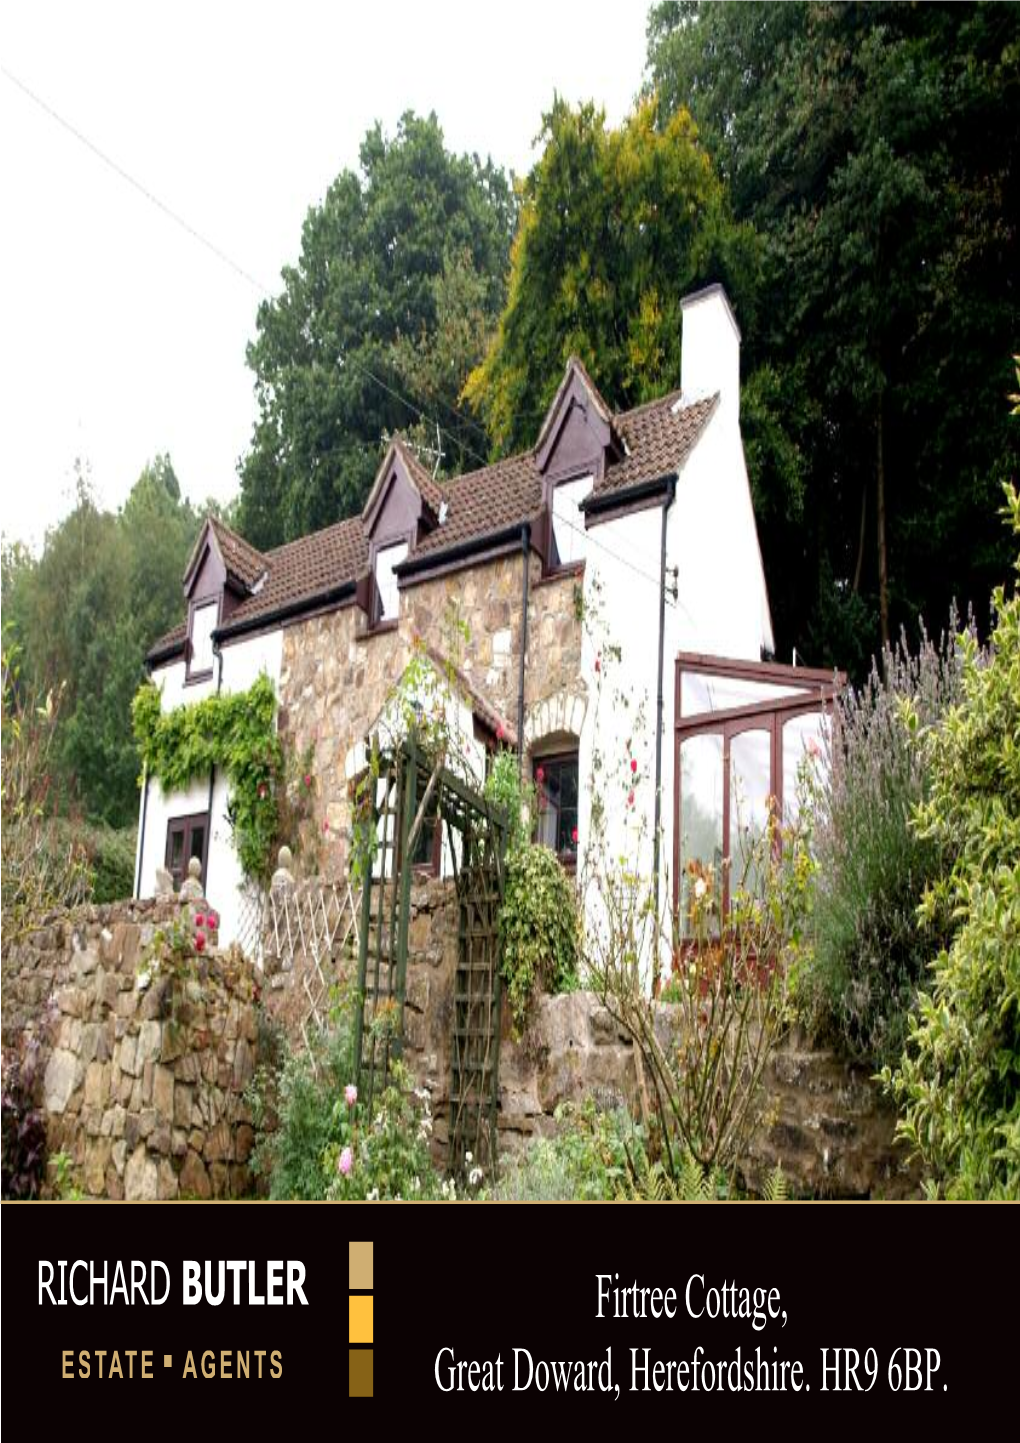 Firtree Cottage, Great Doward, Herefordshire. HR9 6BP. 2 01989 567979